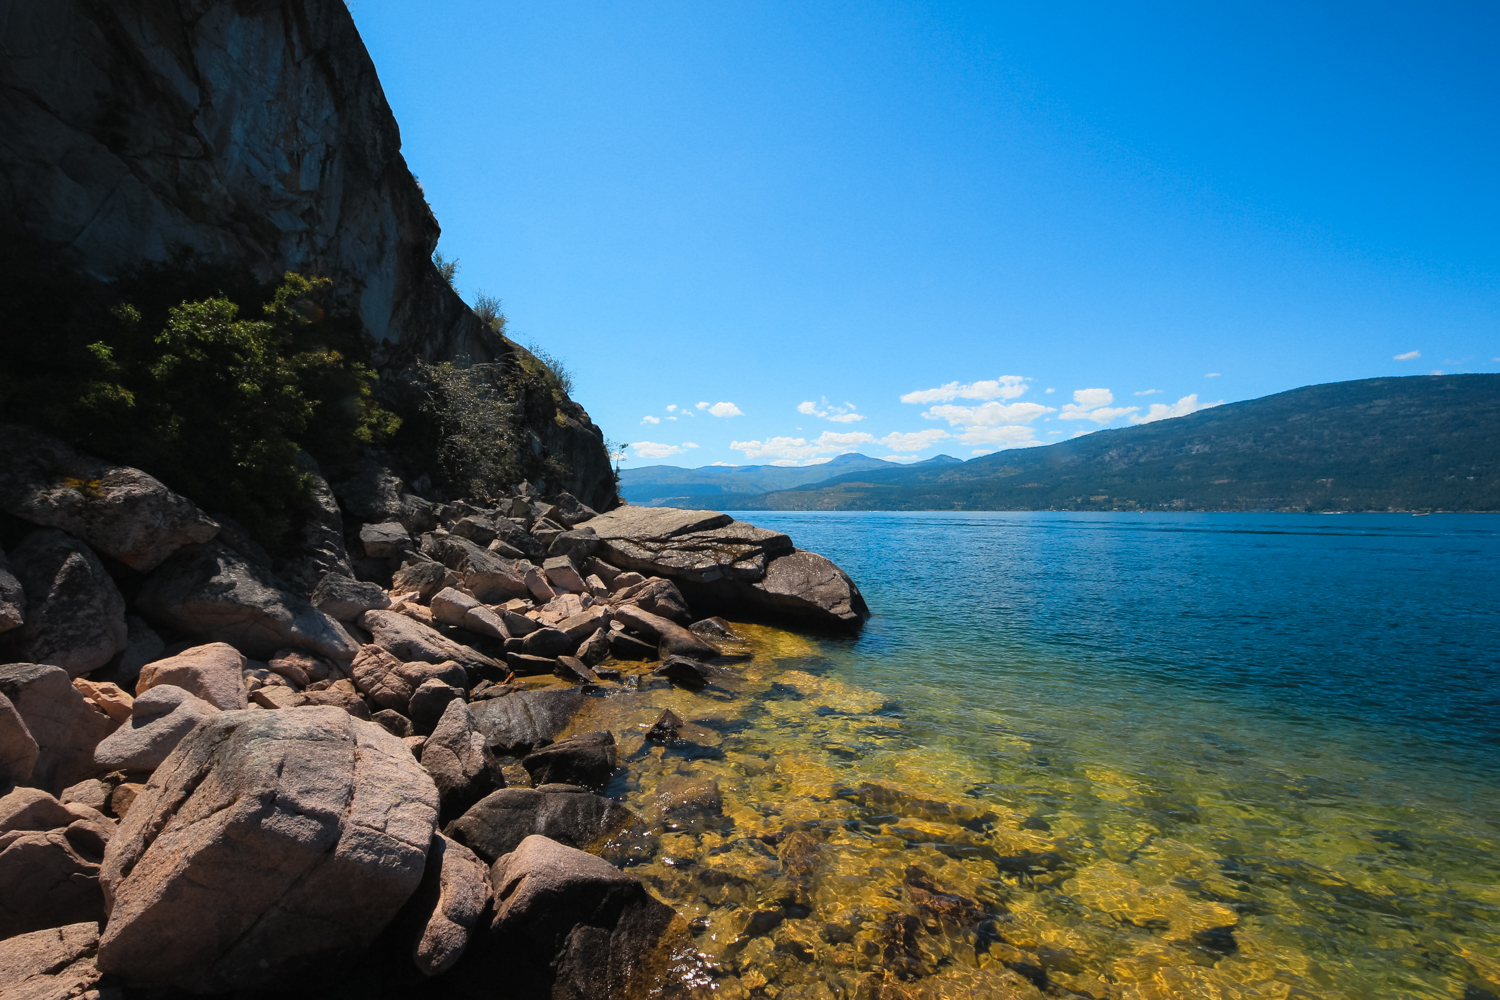 Bright blue and yellow water on the the rocky shoreline of a large lake